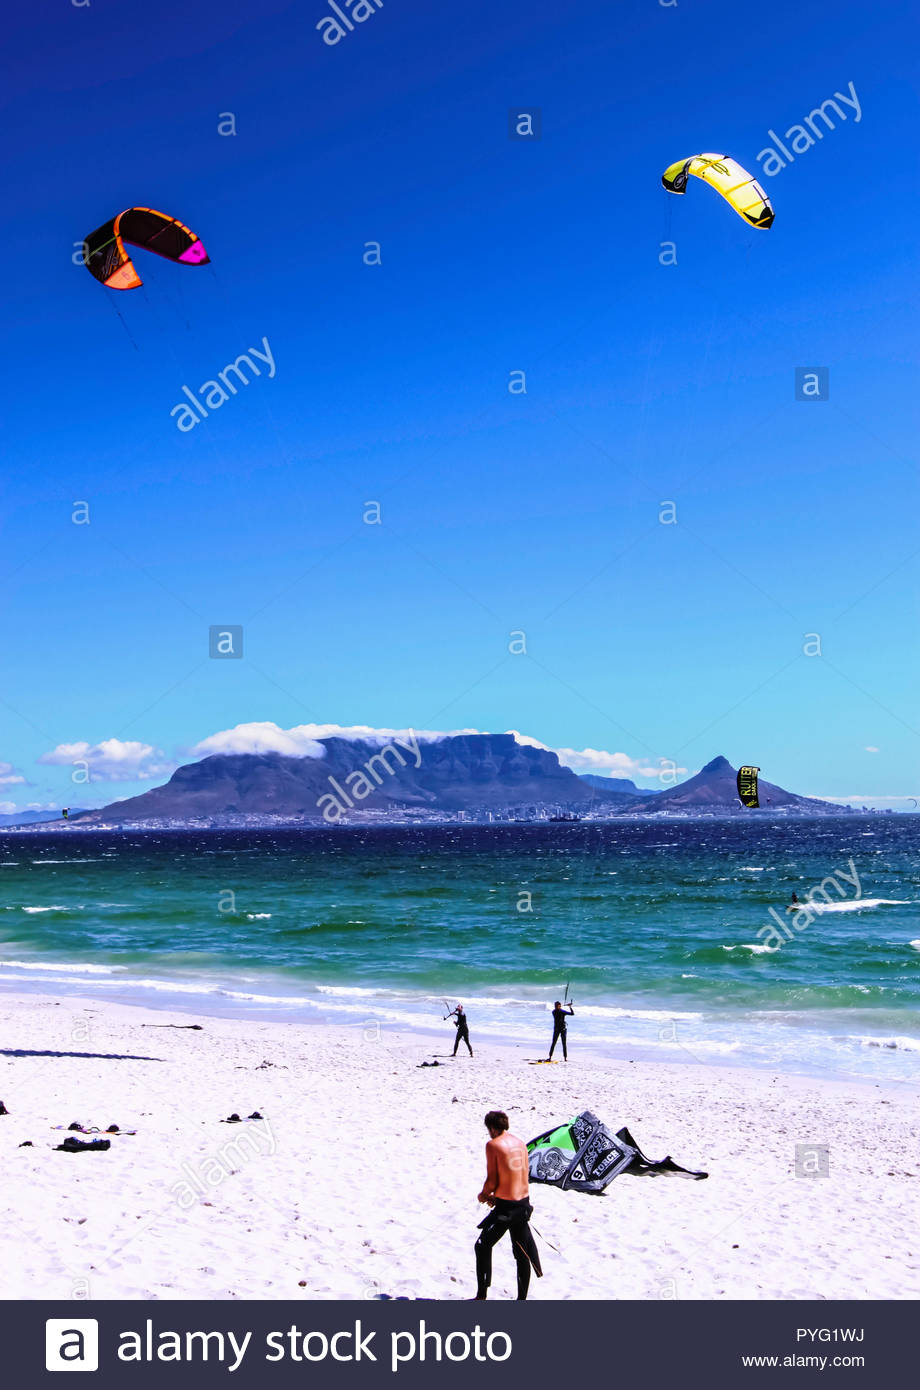 Cape Town Kiteboarding At Bloubergstrand With Table